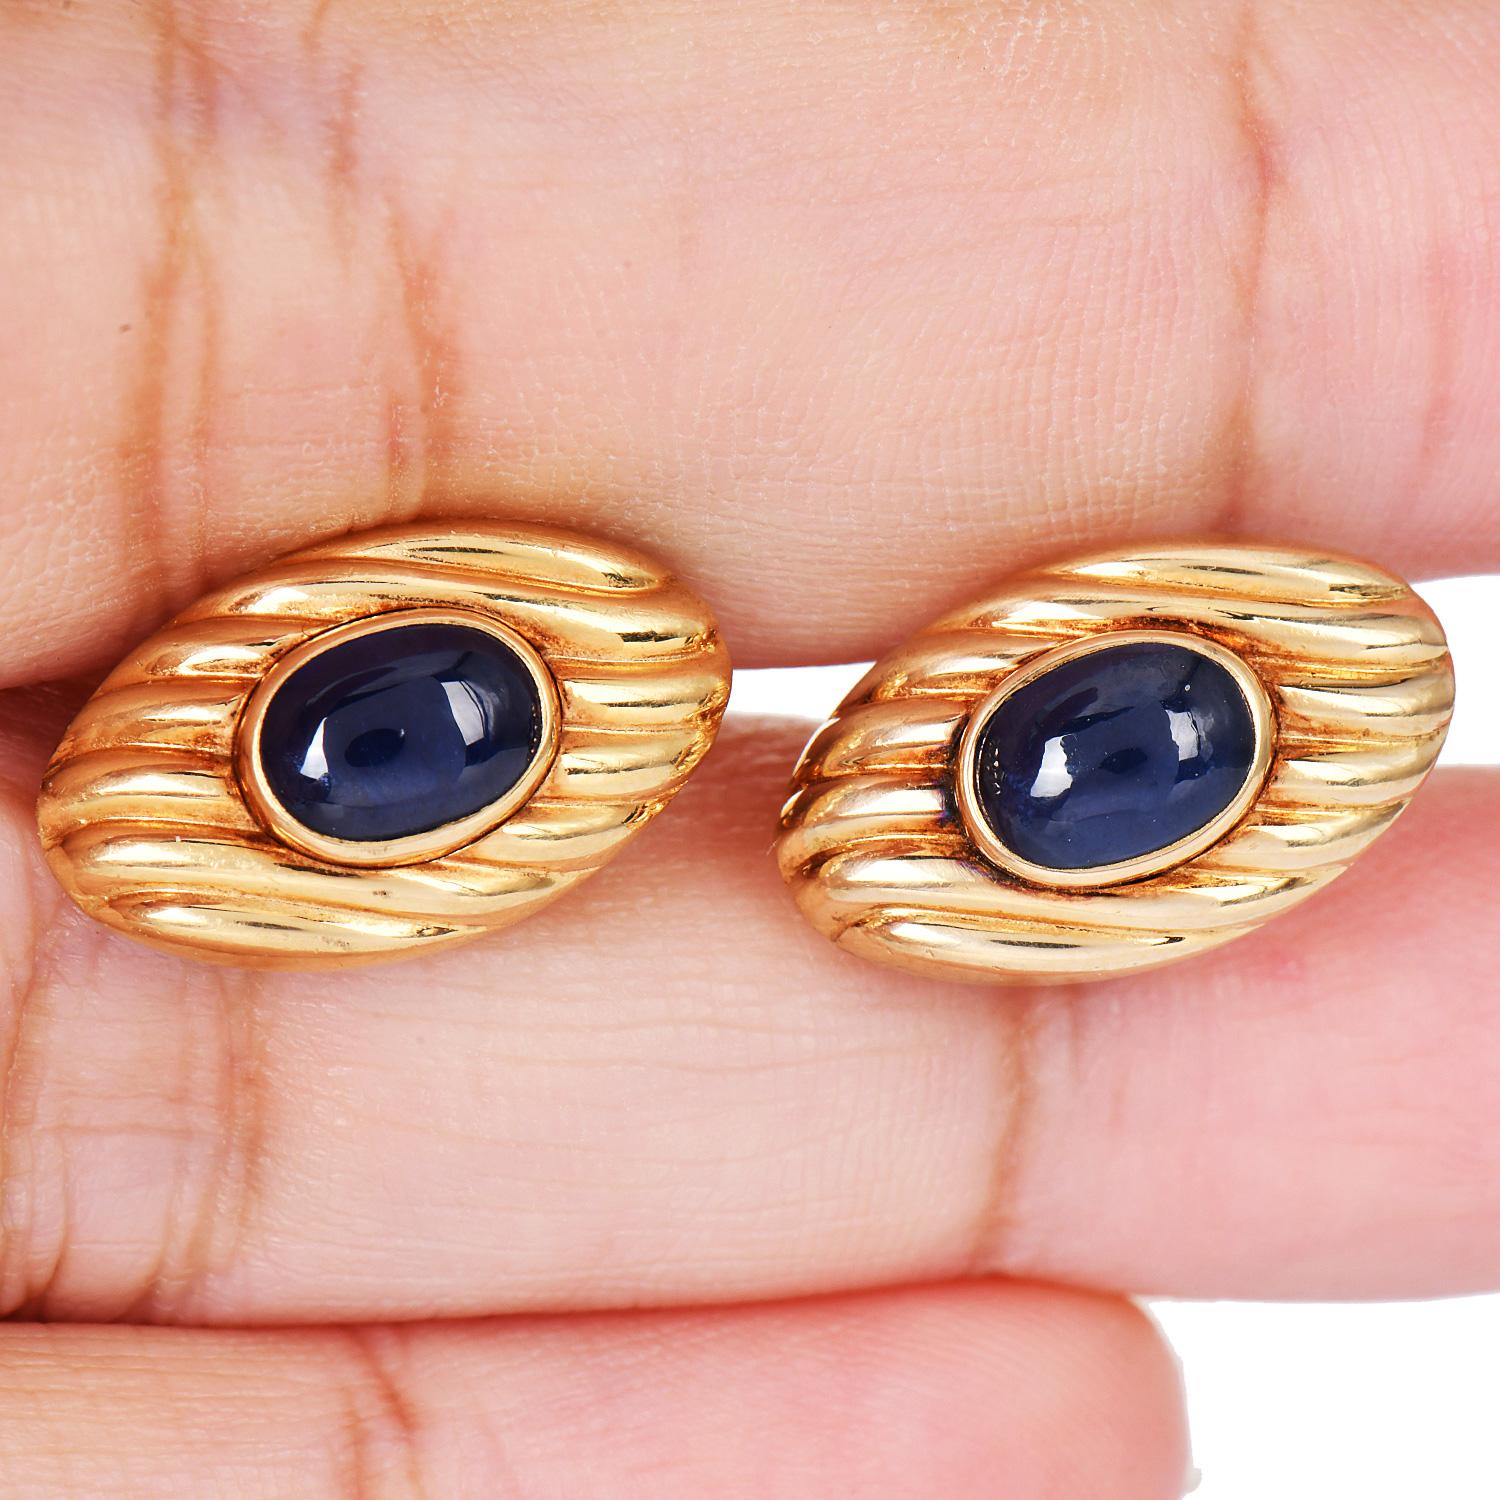 Asprey Vintage Cabochon Sapphire 18K Gold Oval Cuff Links In Excellent Condition For Sale In Miami, FL